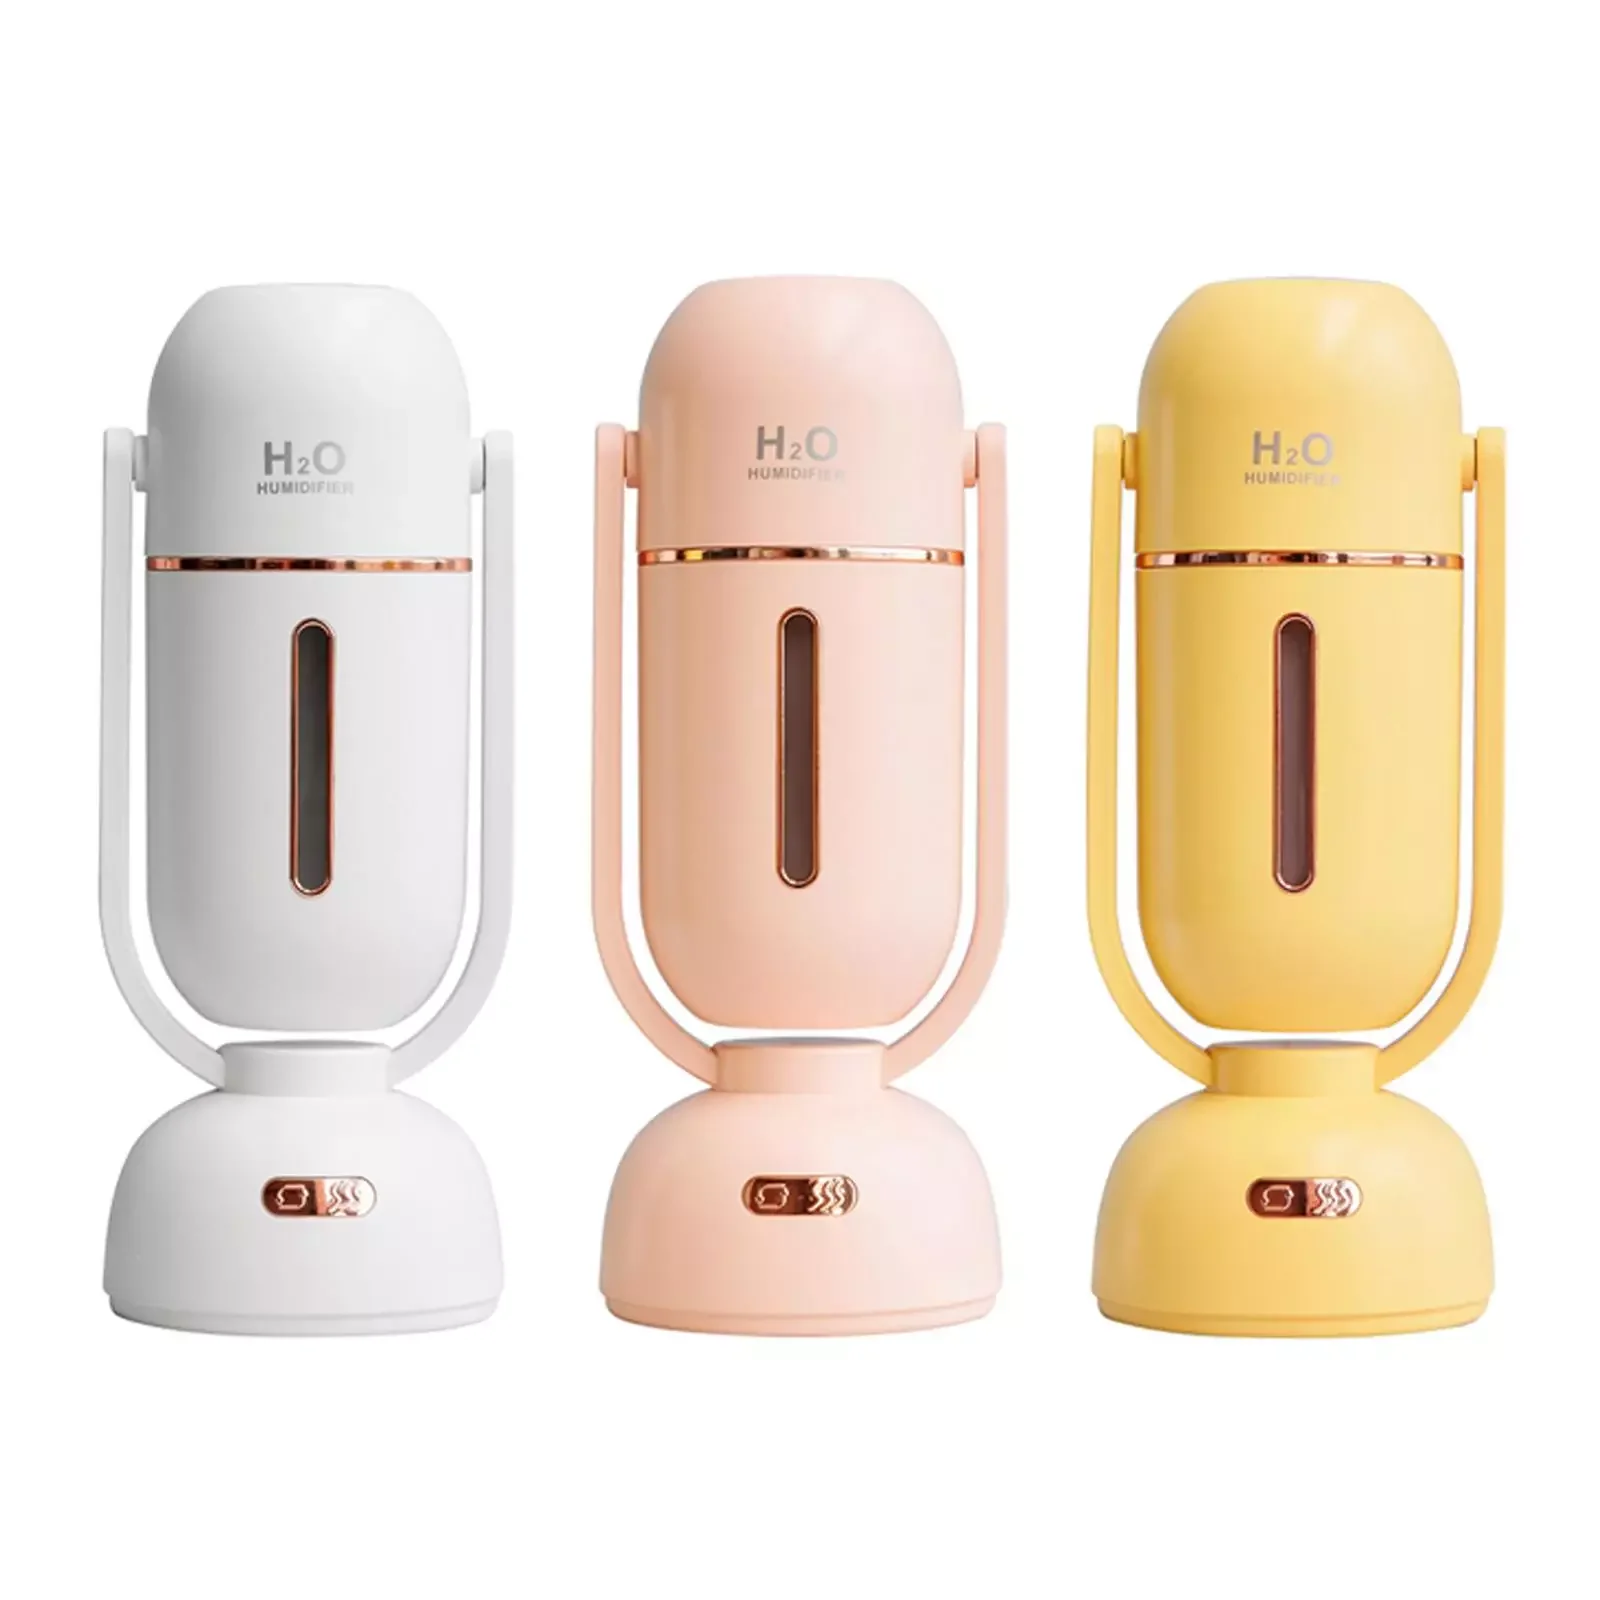 Wireless Humidifier Aroma Diffuser Colorful Nightlight Two Modes Auto-Shut Off Quiet Cool Mist 180° Rotation USB for Living Room